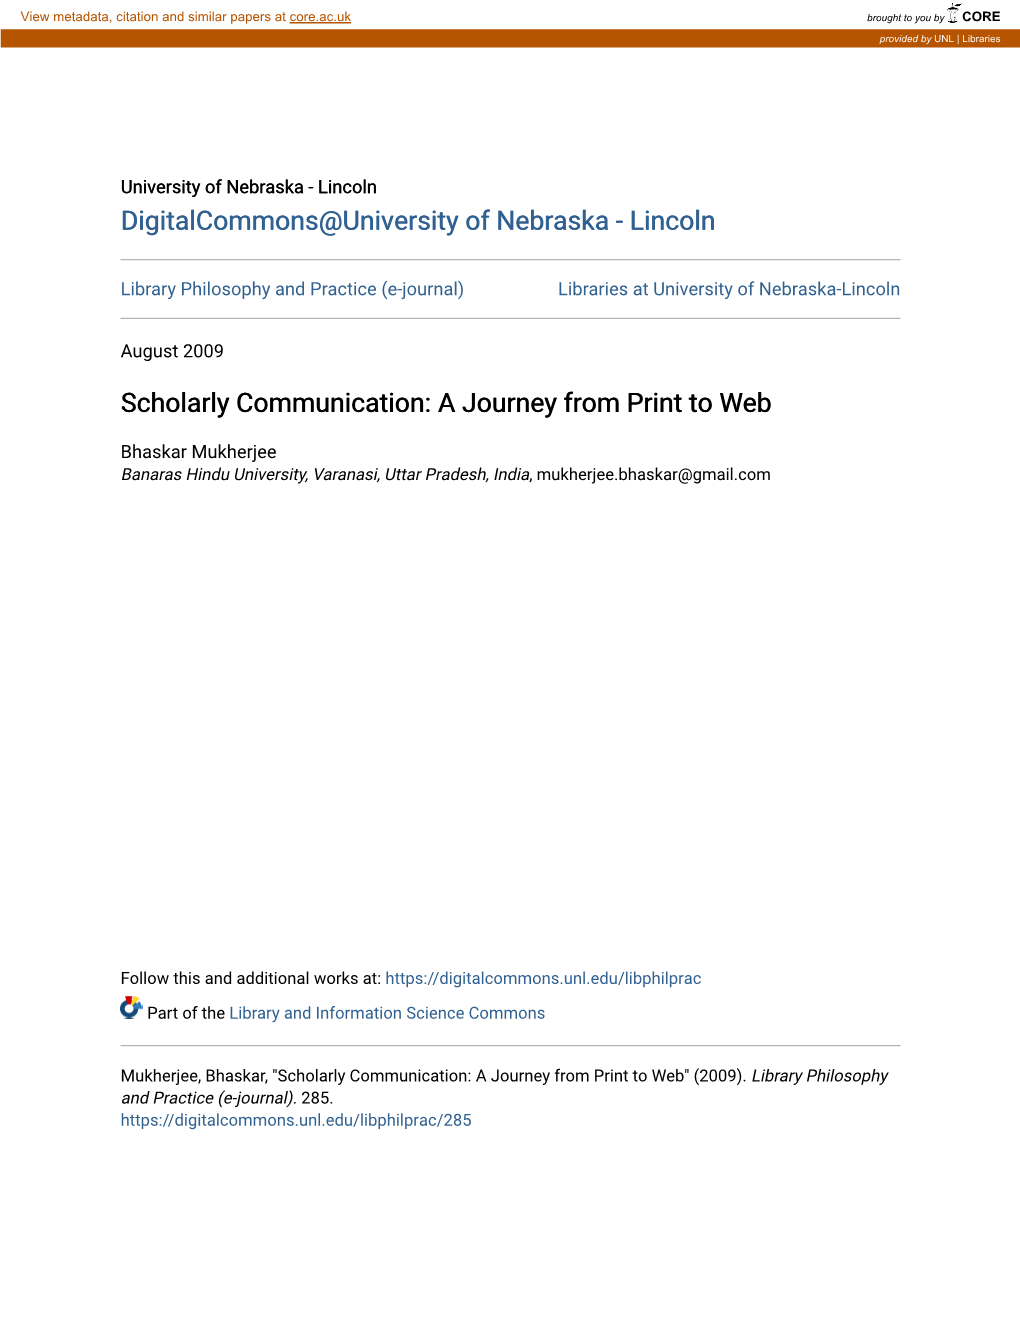 Scholarly Communication: a Journey from Print to Web